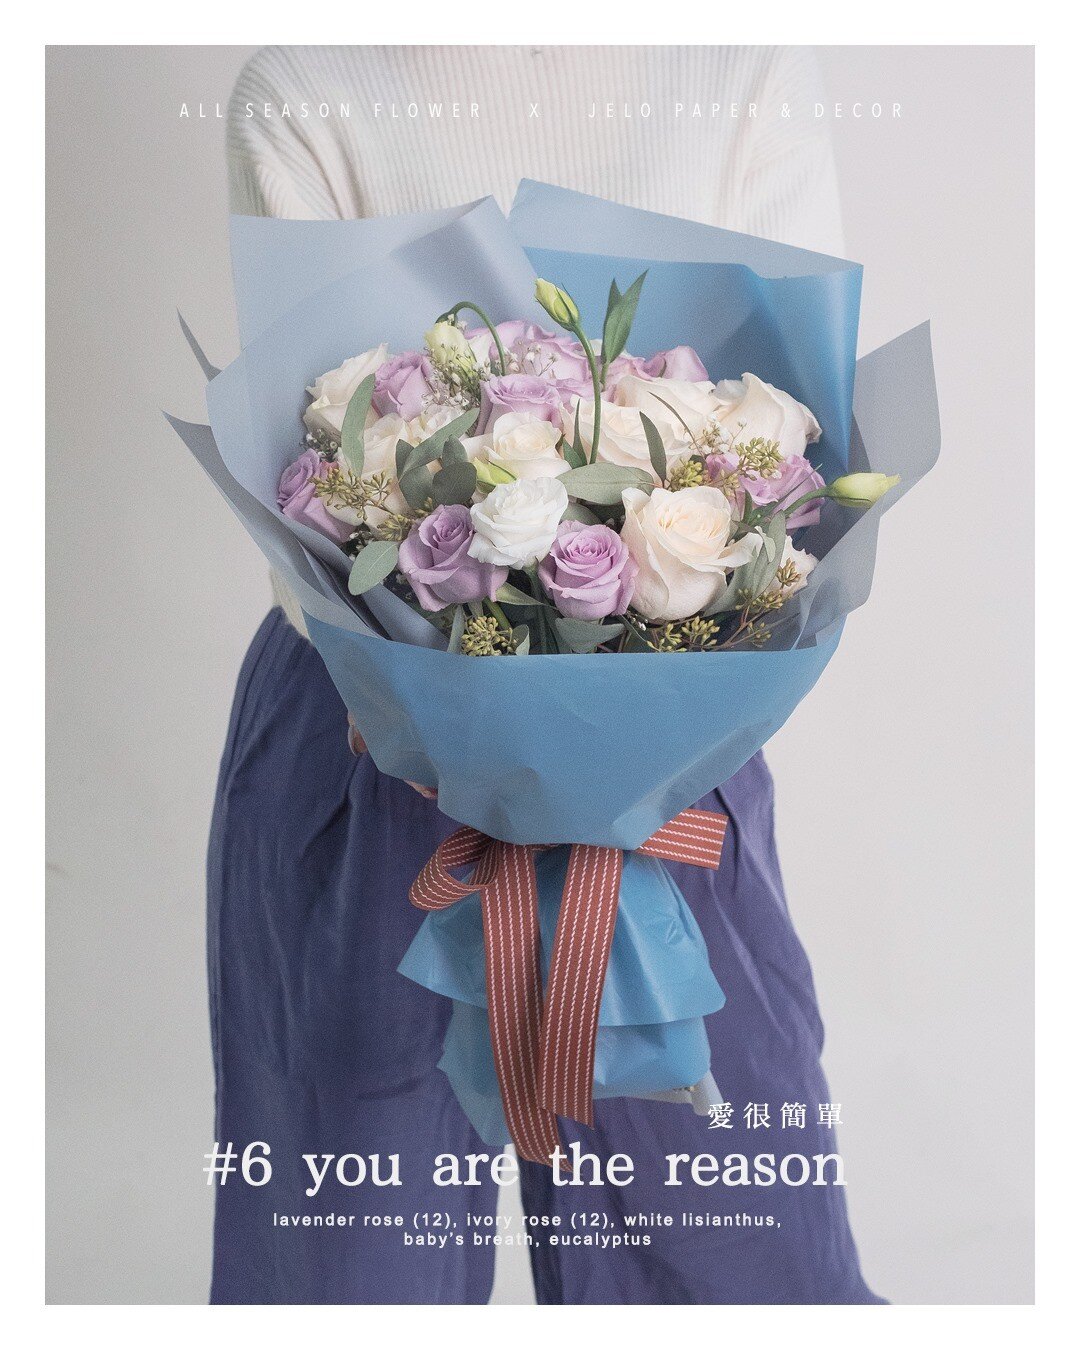 🌷 Valentine's flowers collection

#6 You are the Reason 
愛很簡單

15% off (1/4 - 1/25)

Free! Lyrics message card

How to order : 
Message us or Online order : 
www.allseasonflower.com/vday21

$12 Delivery flat rate to 5 boroughs
Free pick up in Brookl